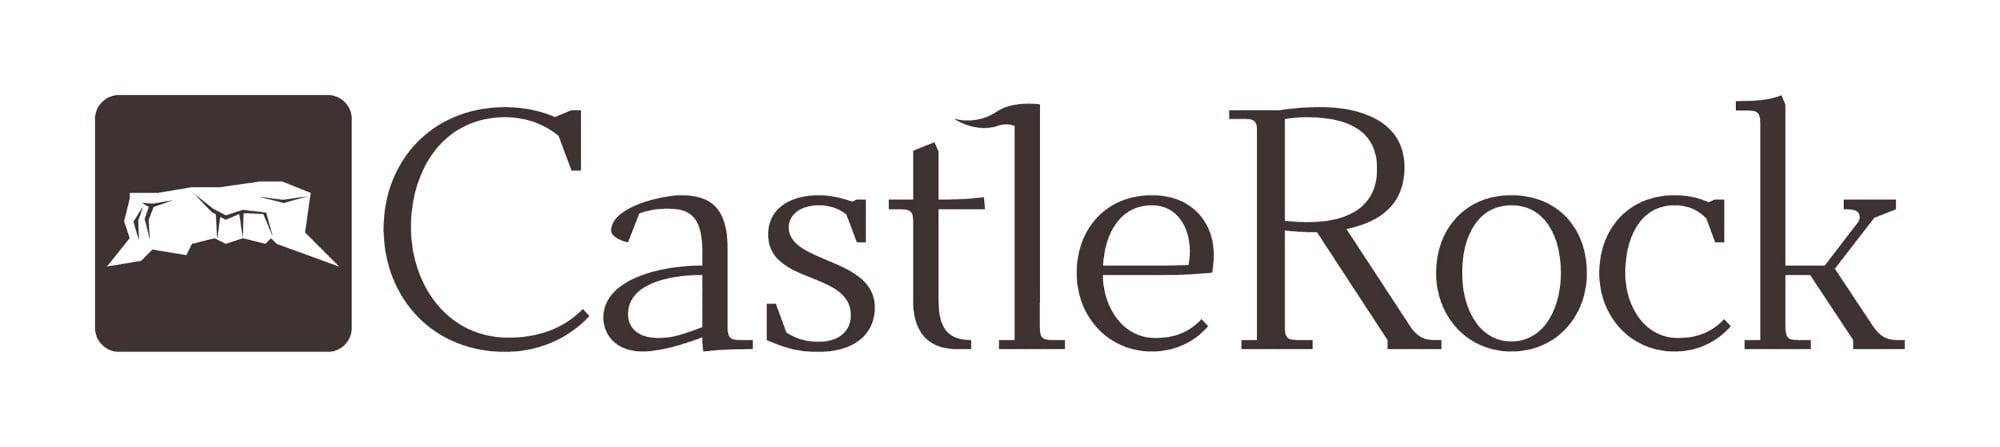 Castle Rock Investment Company Woman Owned